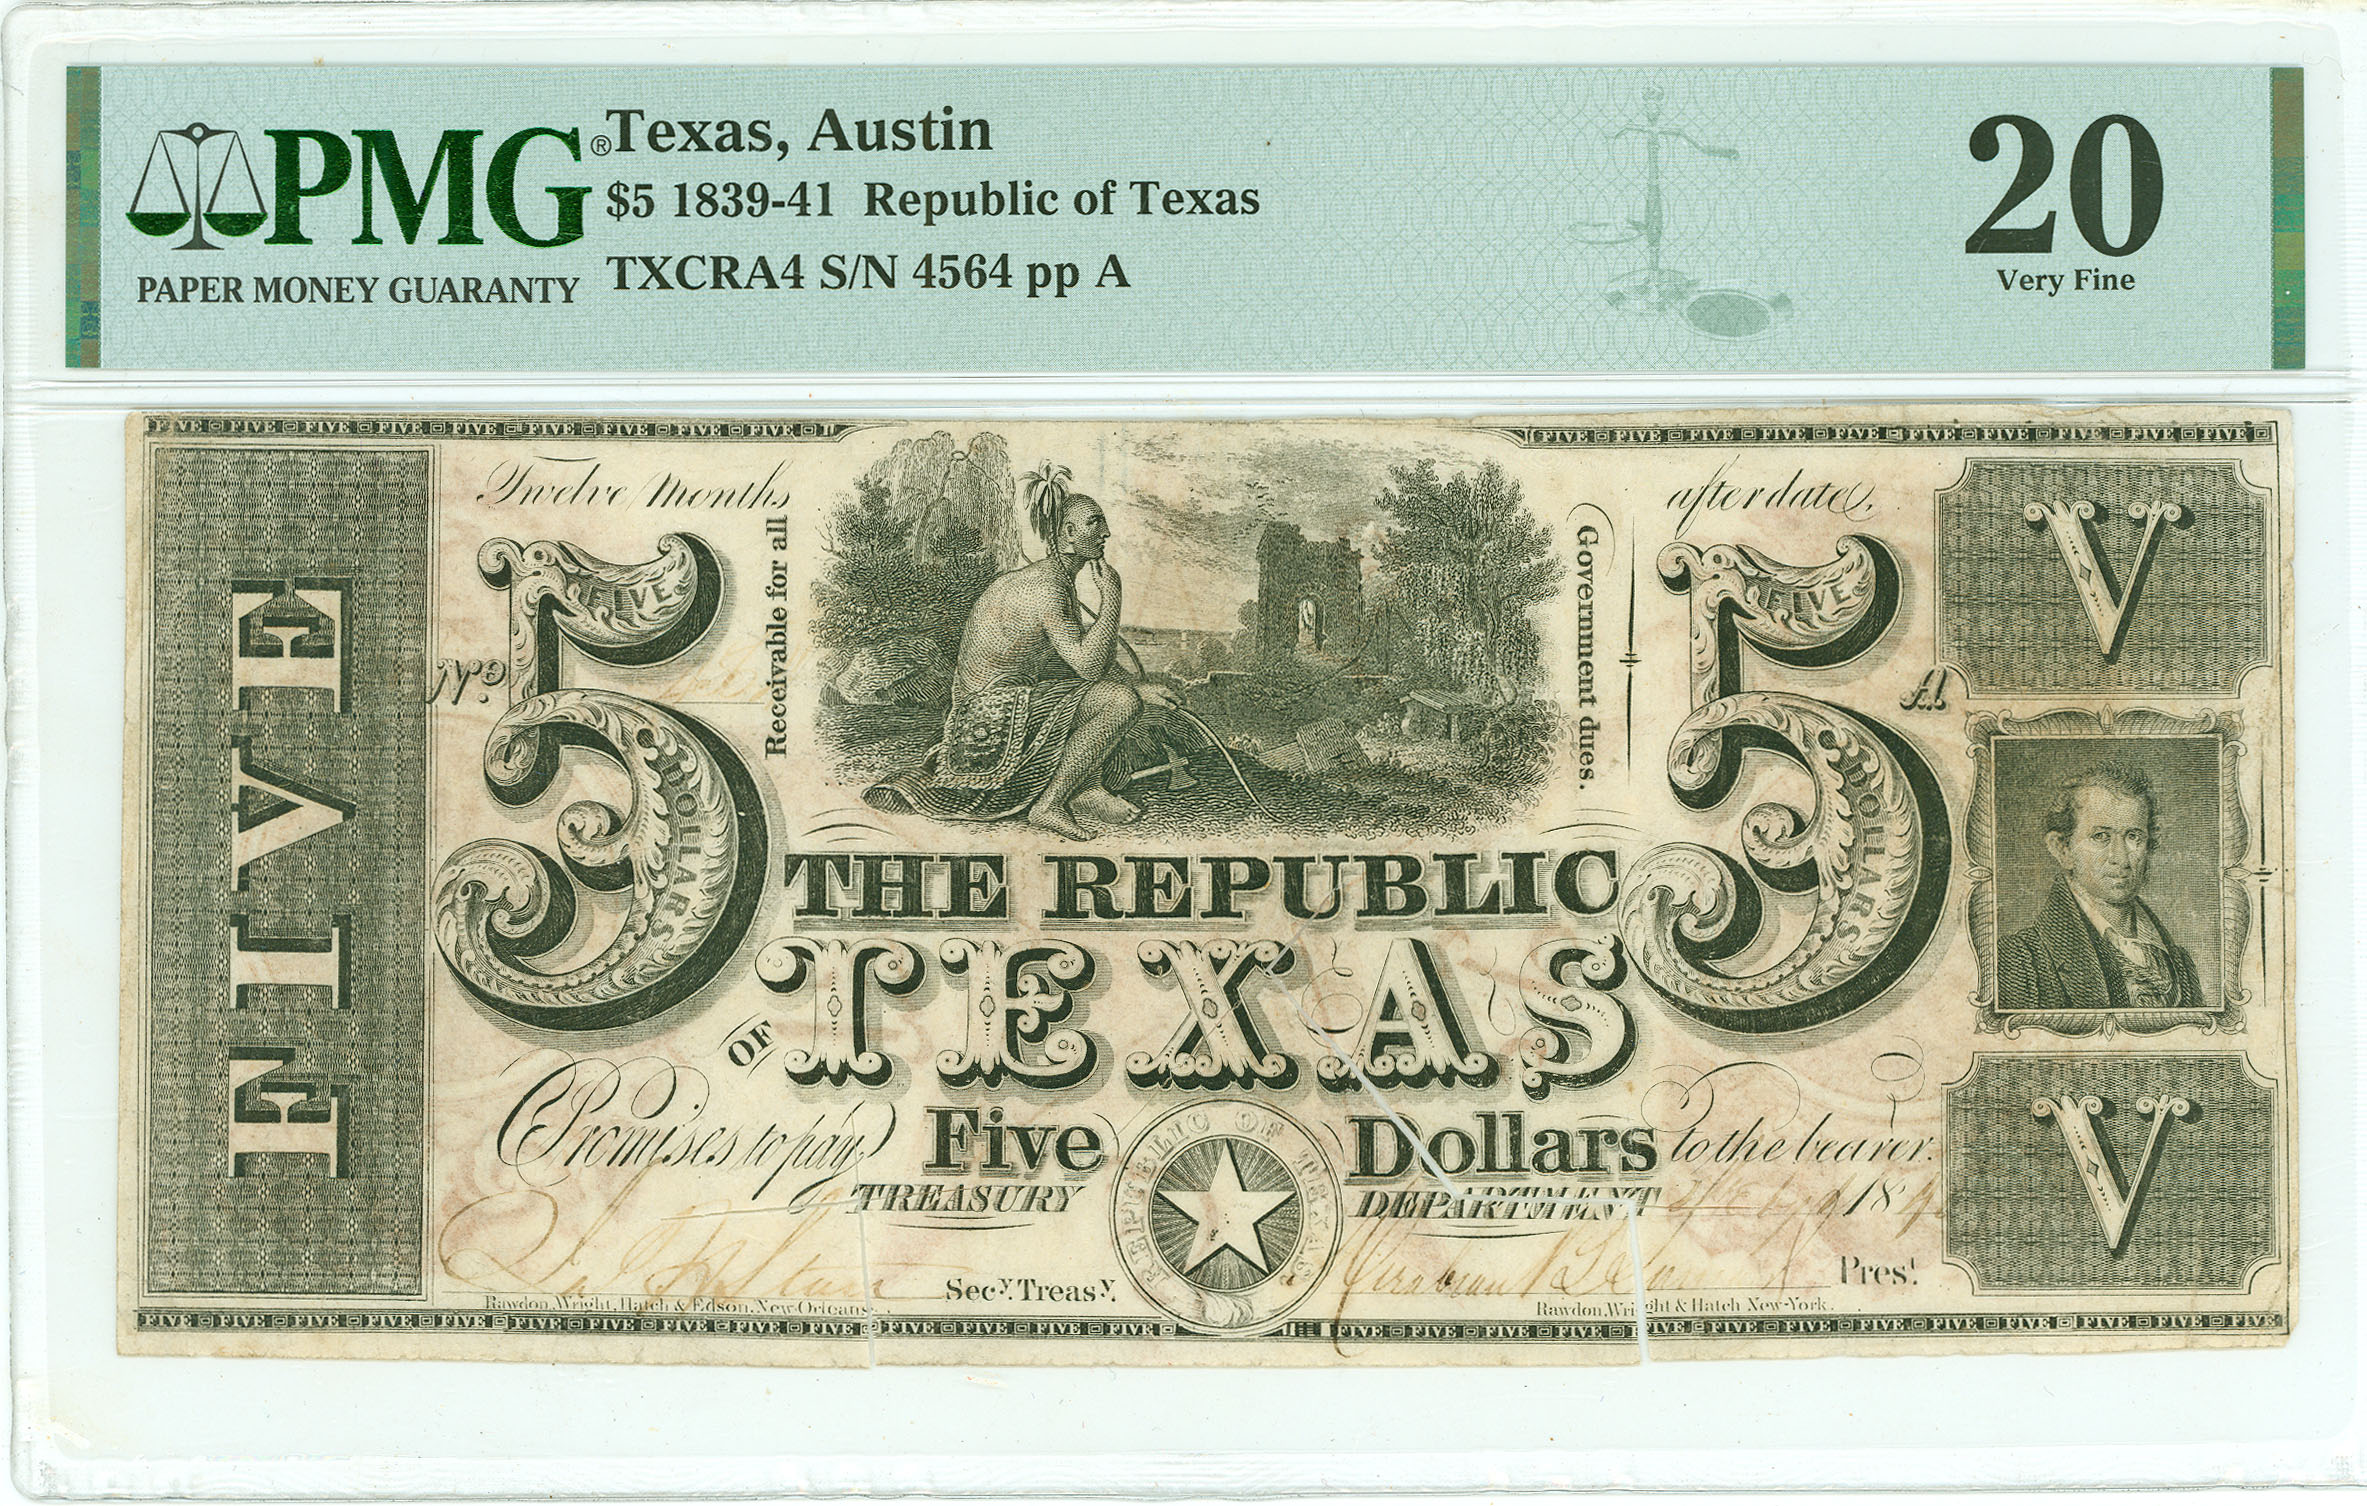 $2.00 $1.00 AND $5.00  STAR Note Paper Money Free Ship Estate Lot of Notes 